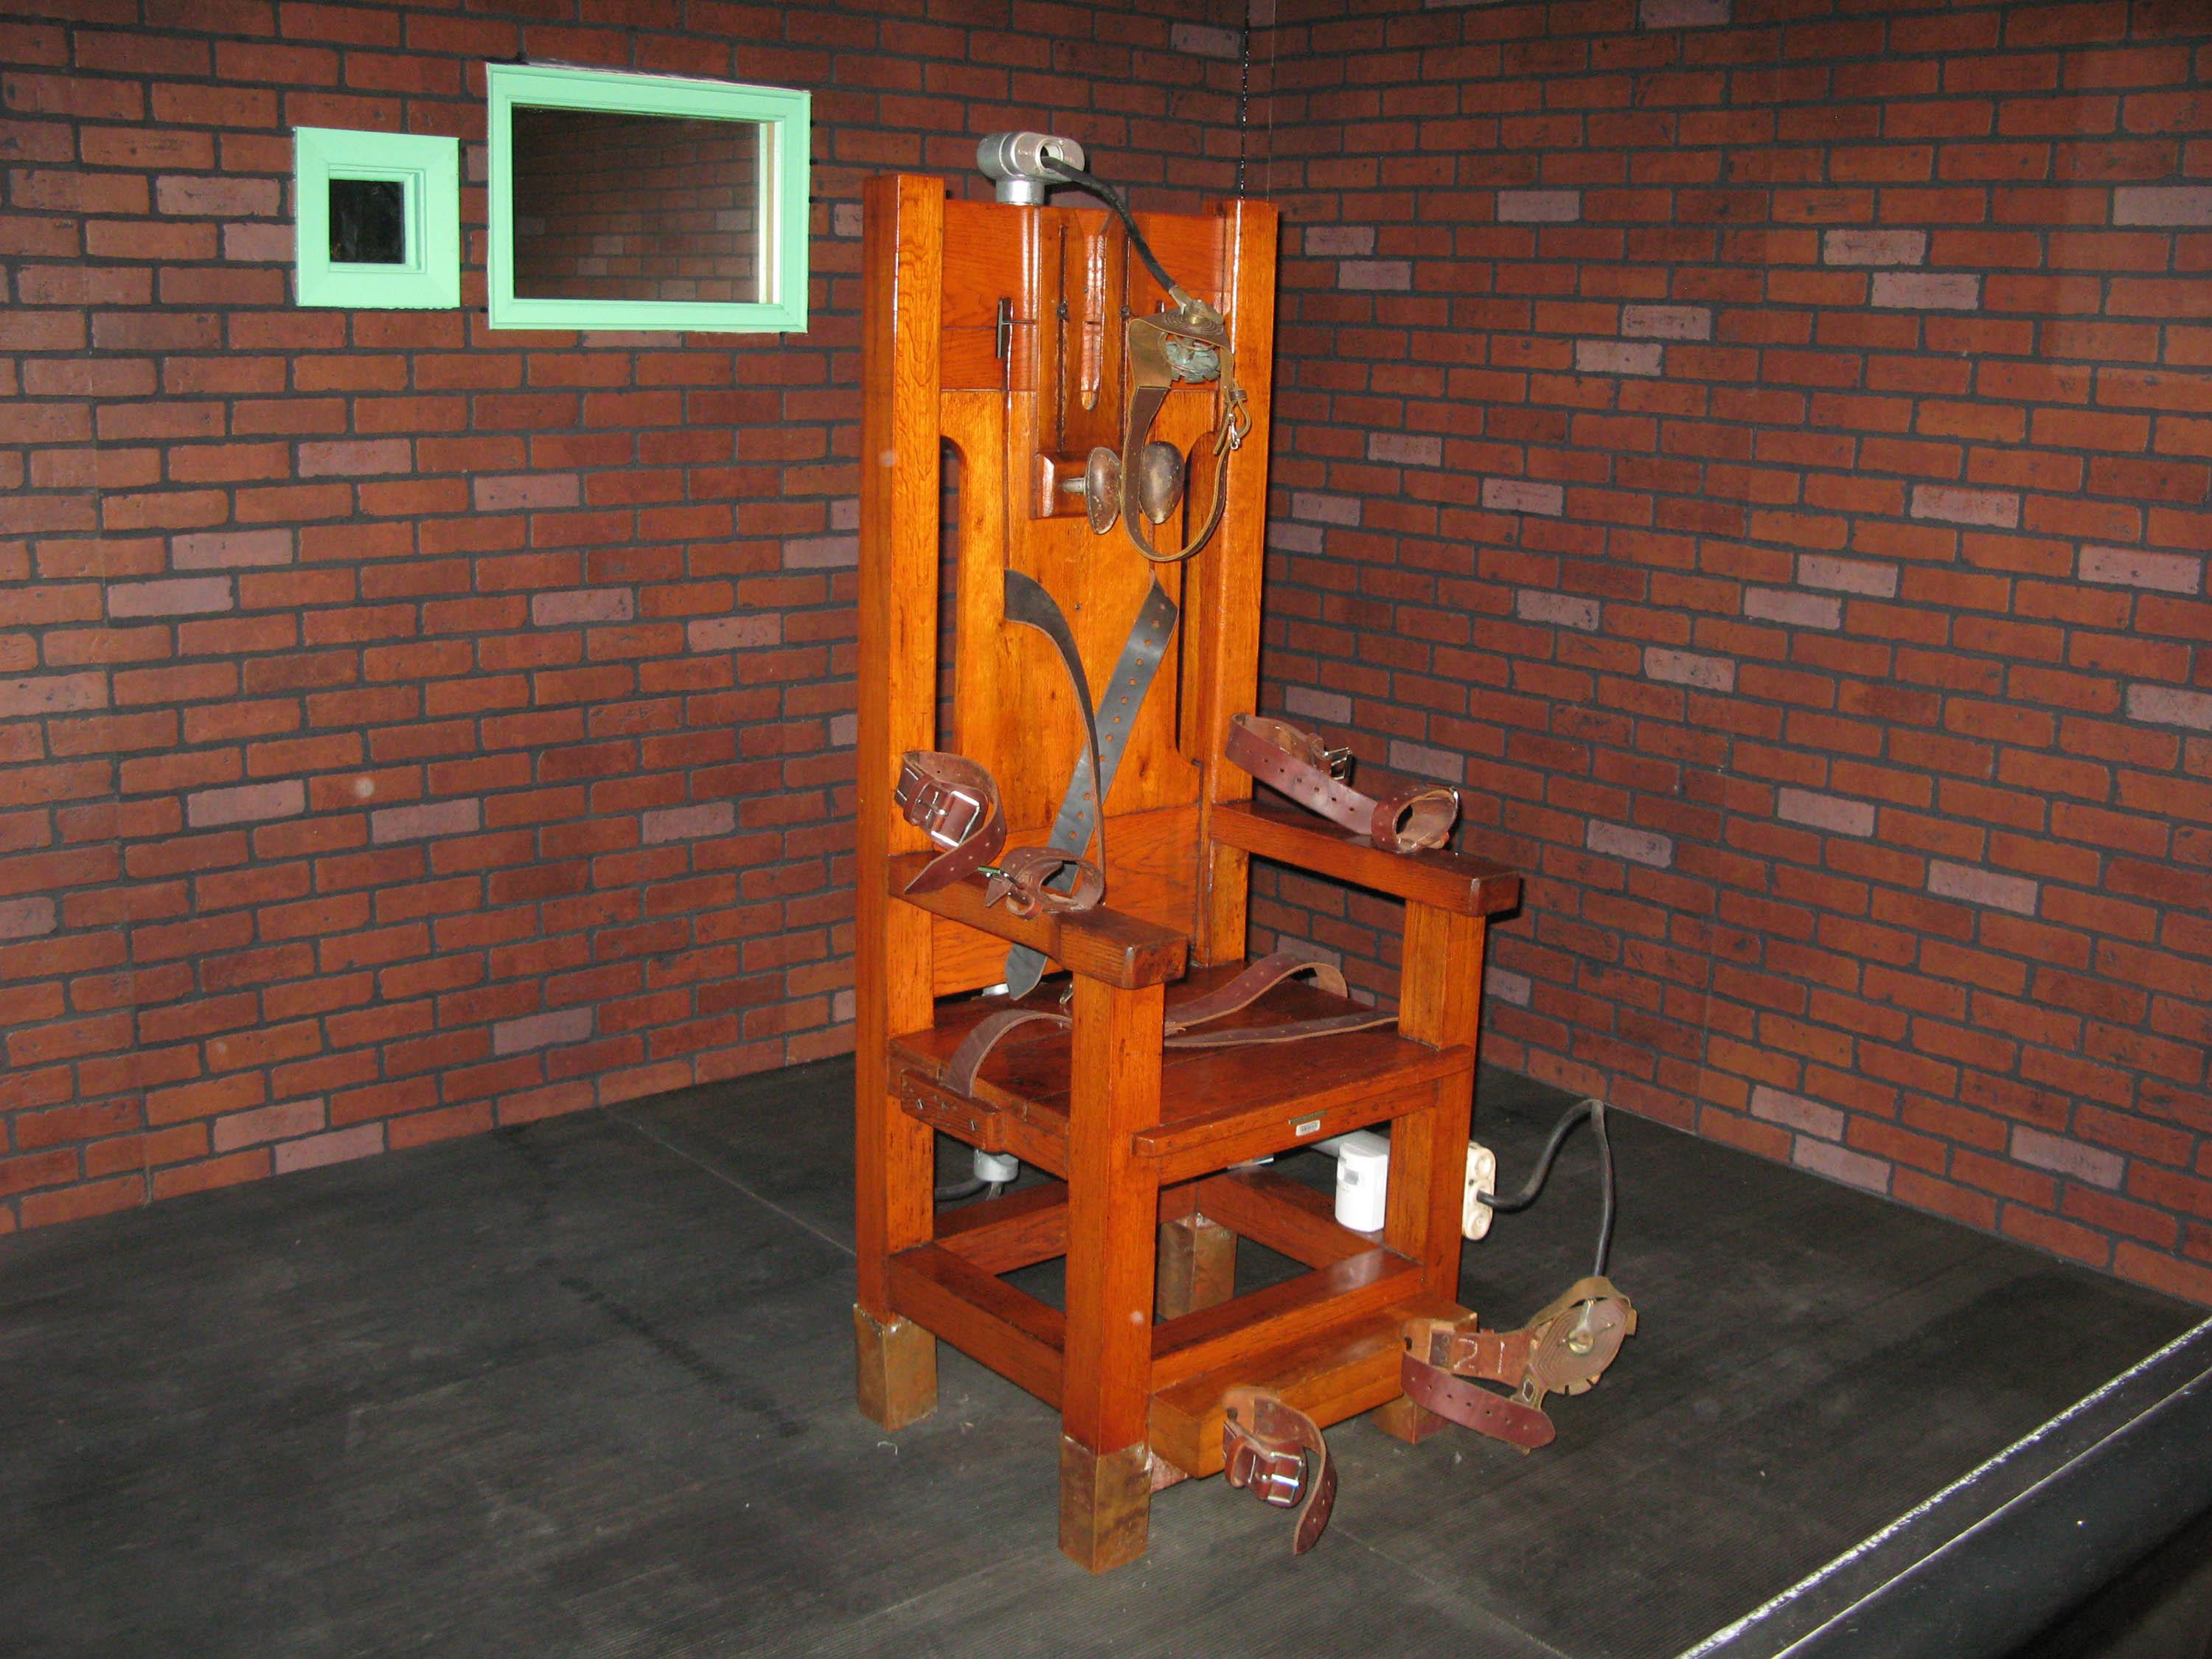 A wooden chair with straps and electric devices, looks very much like an old torture implement. 